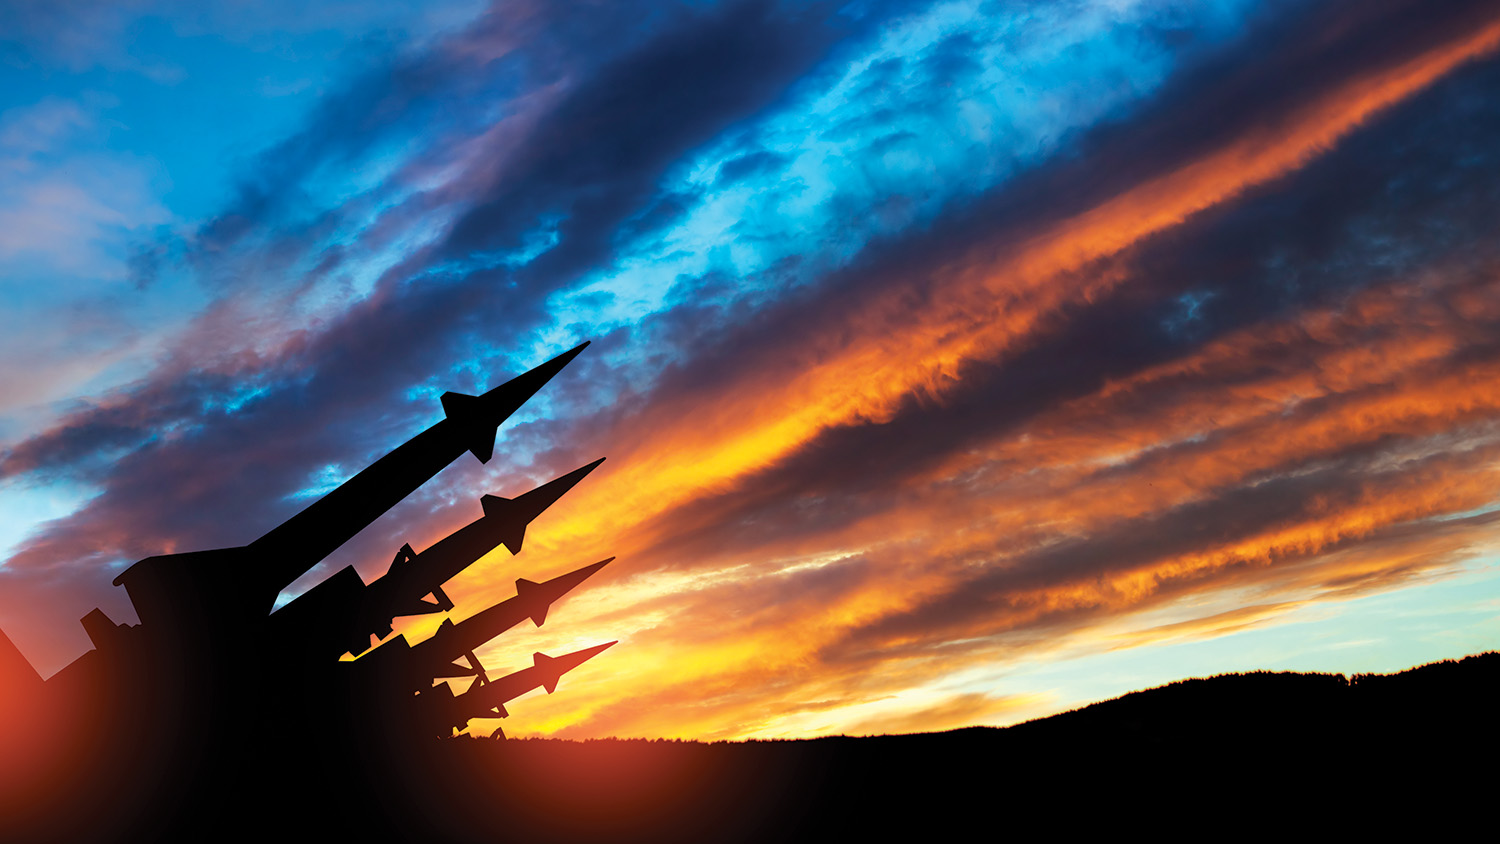 Four missiles pointed upwards against a sky at sunset, showing hues of blue, brown, orange, and yellow.